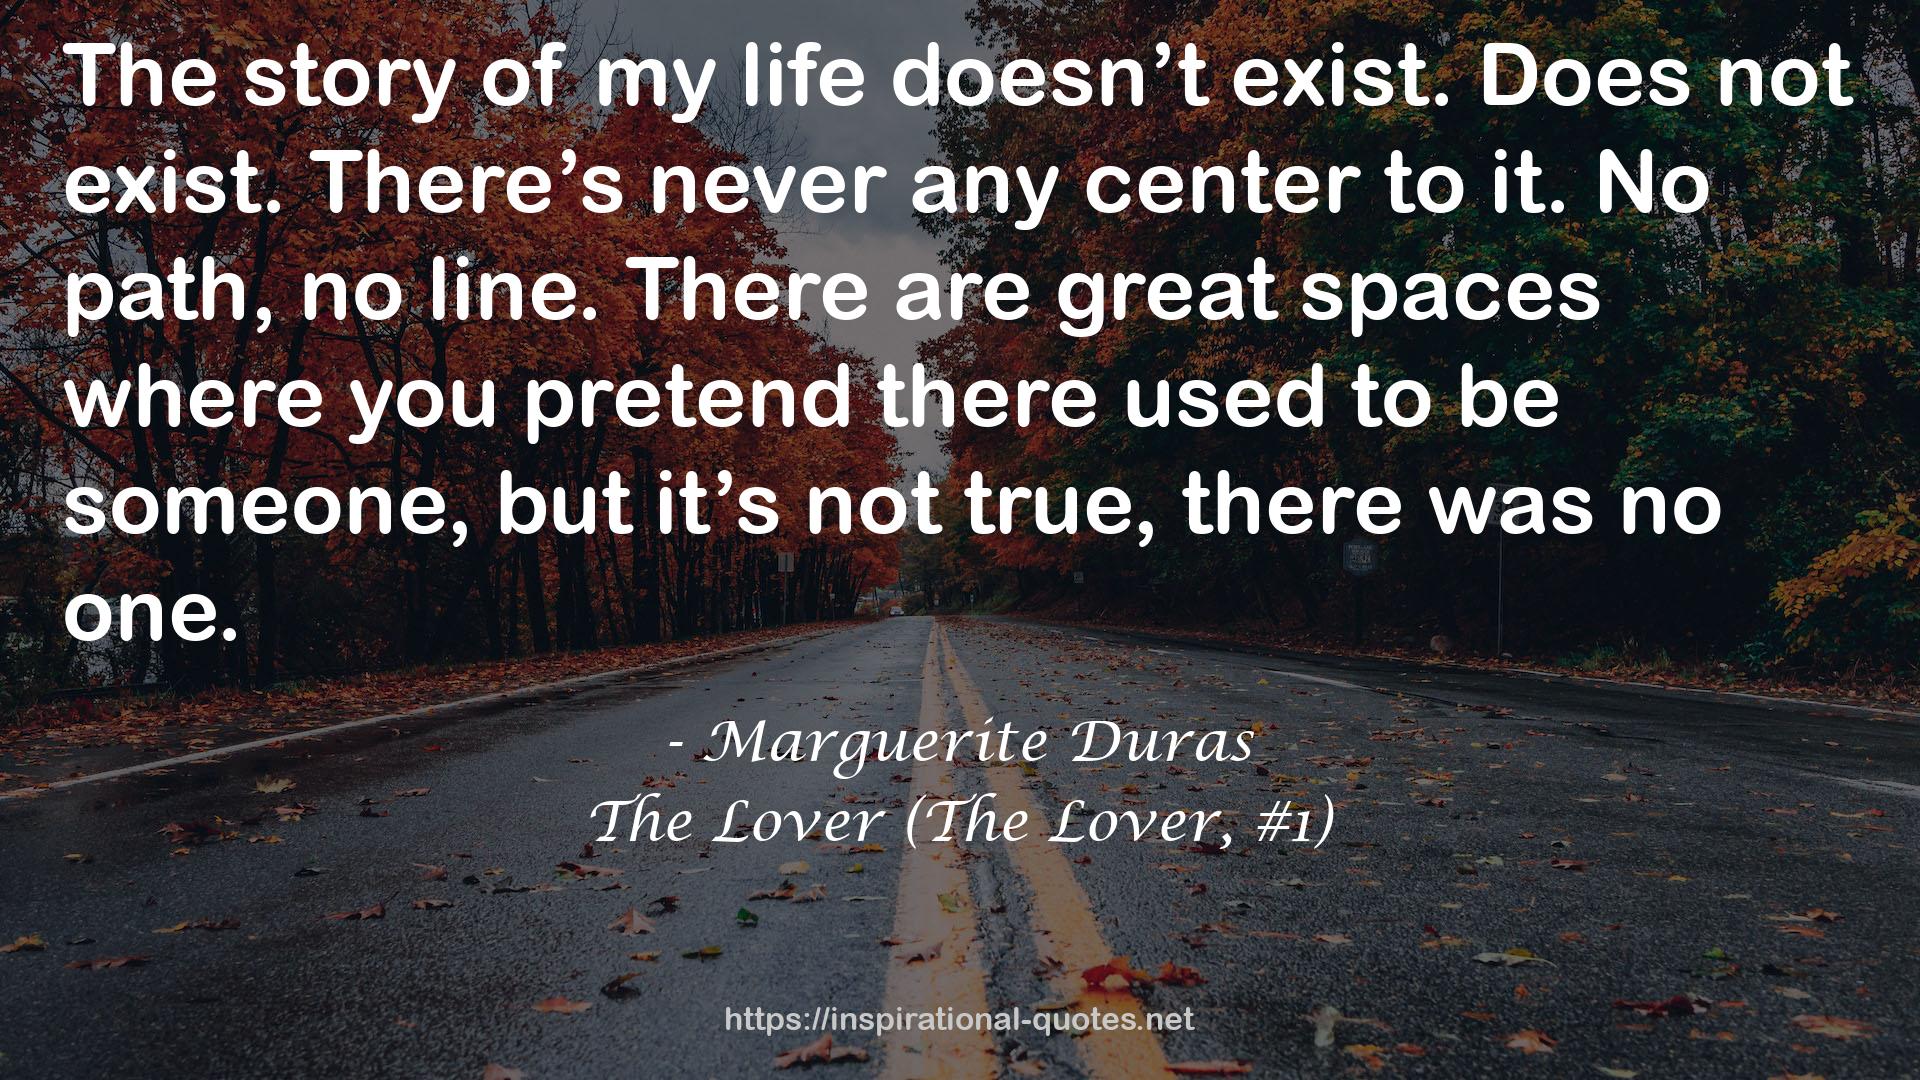 The Lover (The Lover, #1) QUOTES